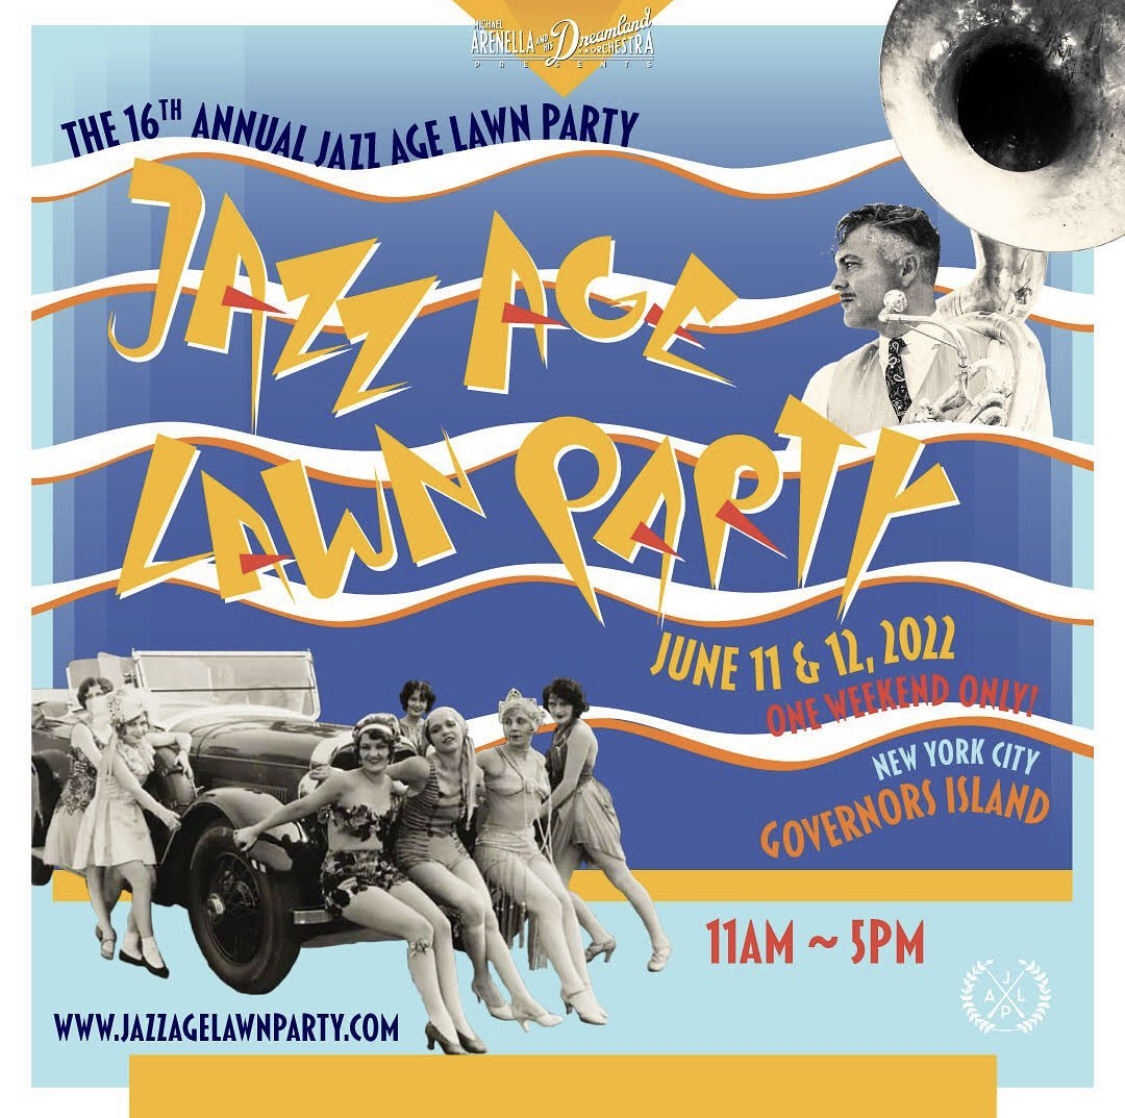 16Th Annual Jazz Age Lawn Party Invitation June 11 & 12Th, 2022